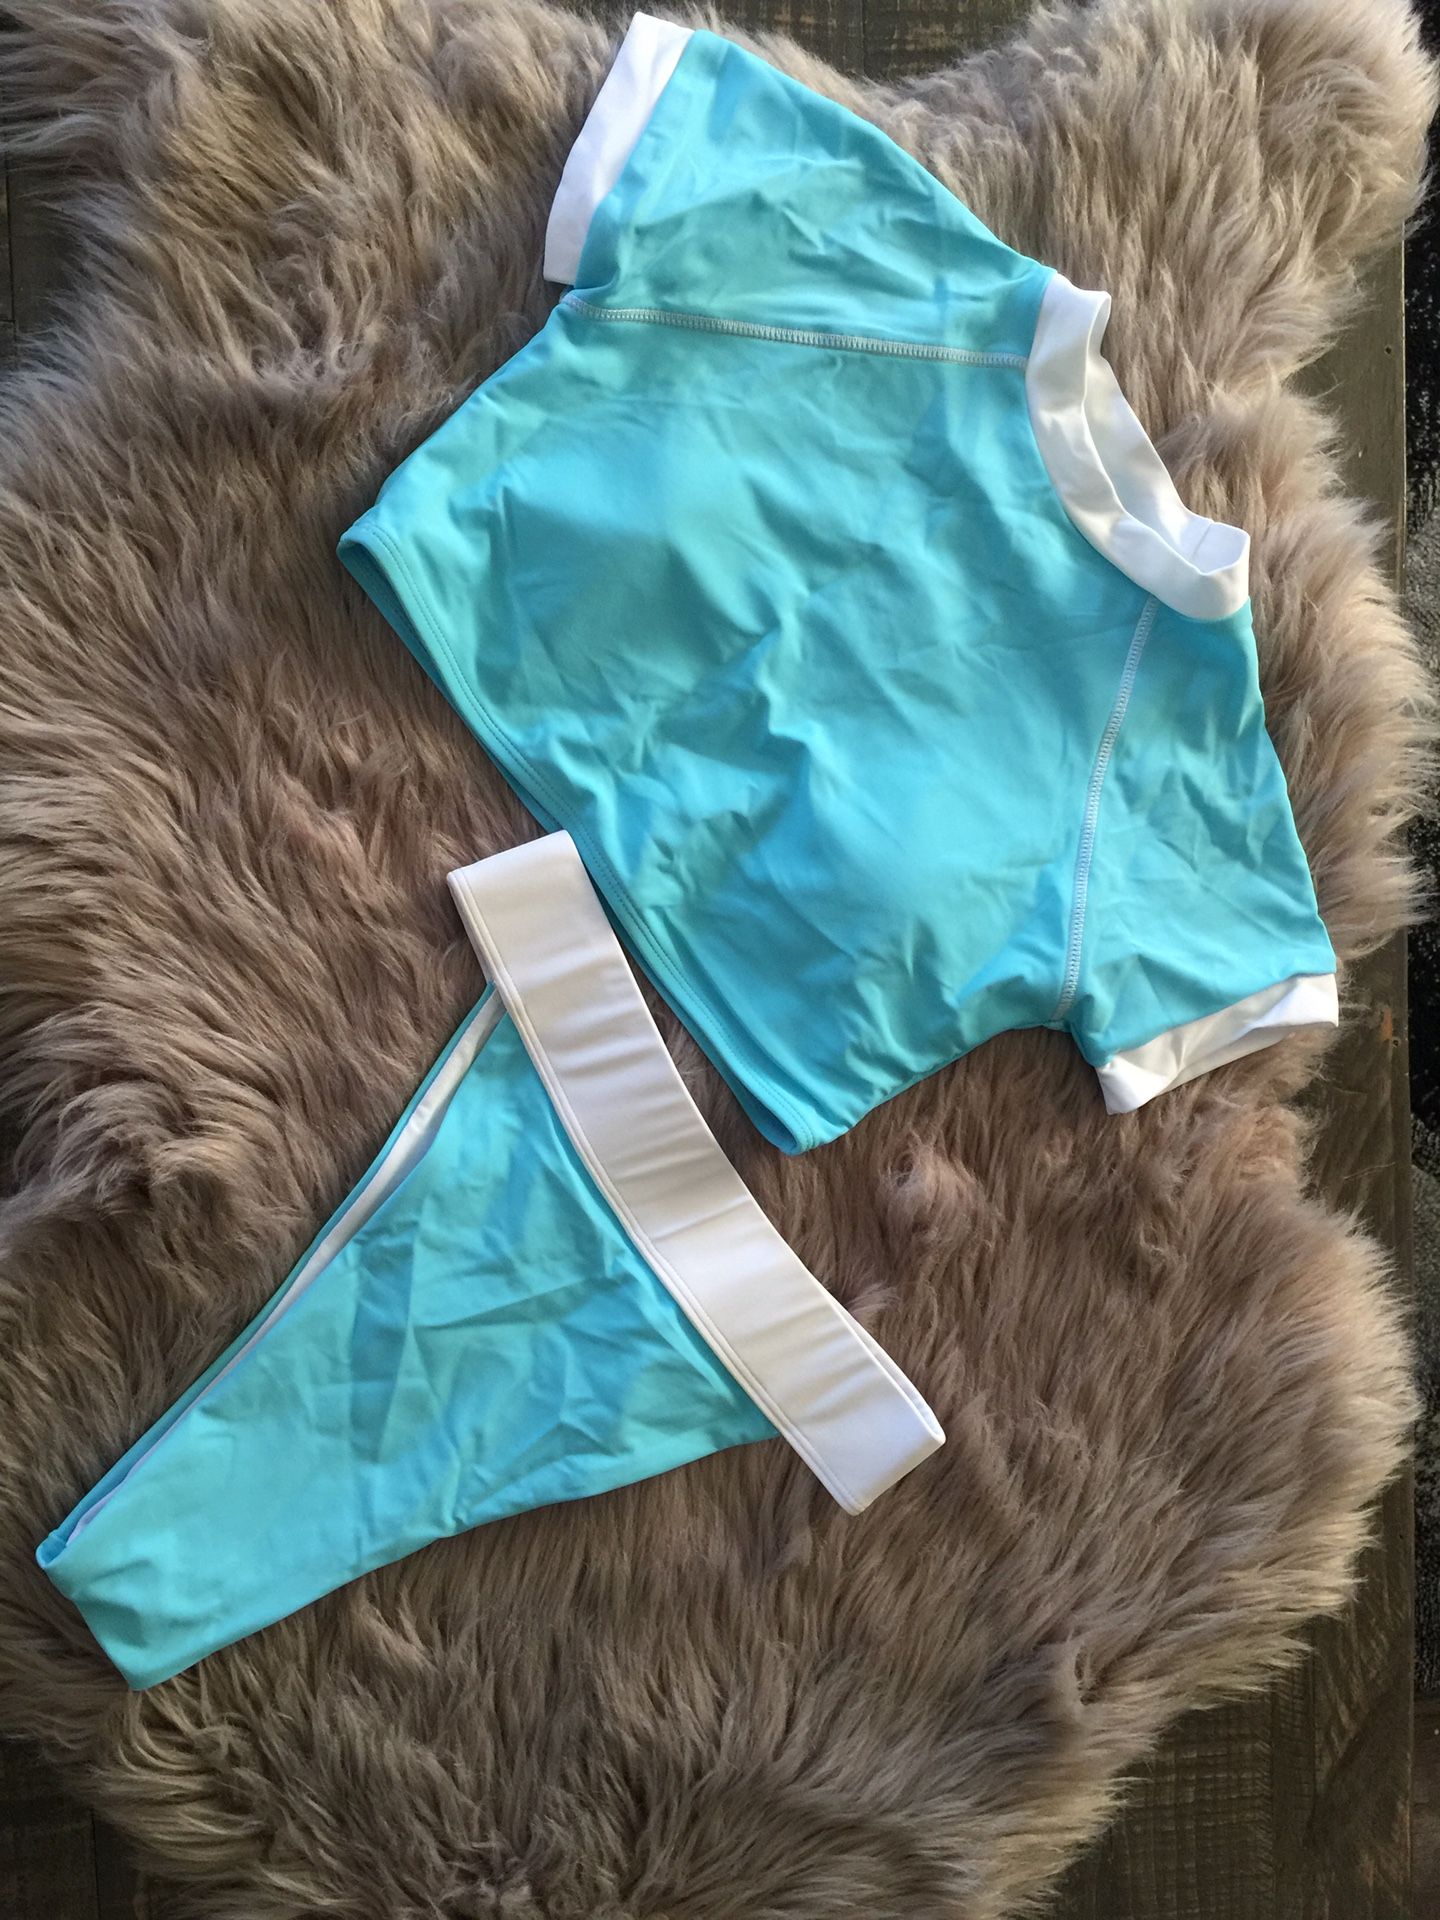 Bathing suit new size small